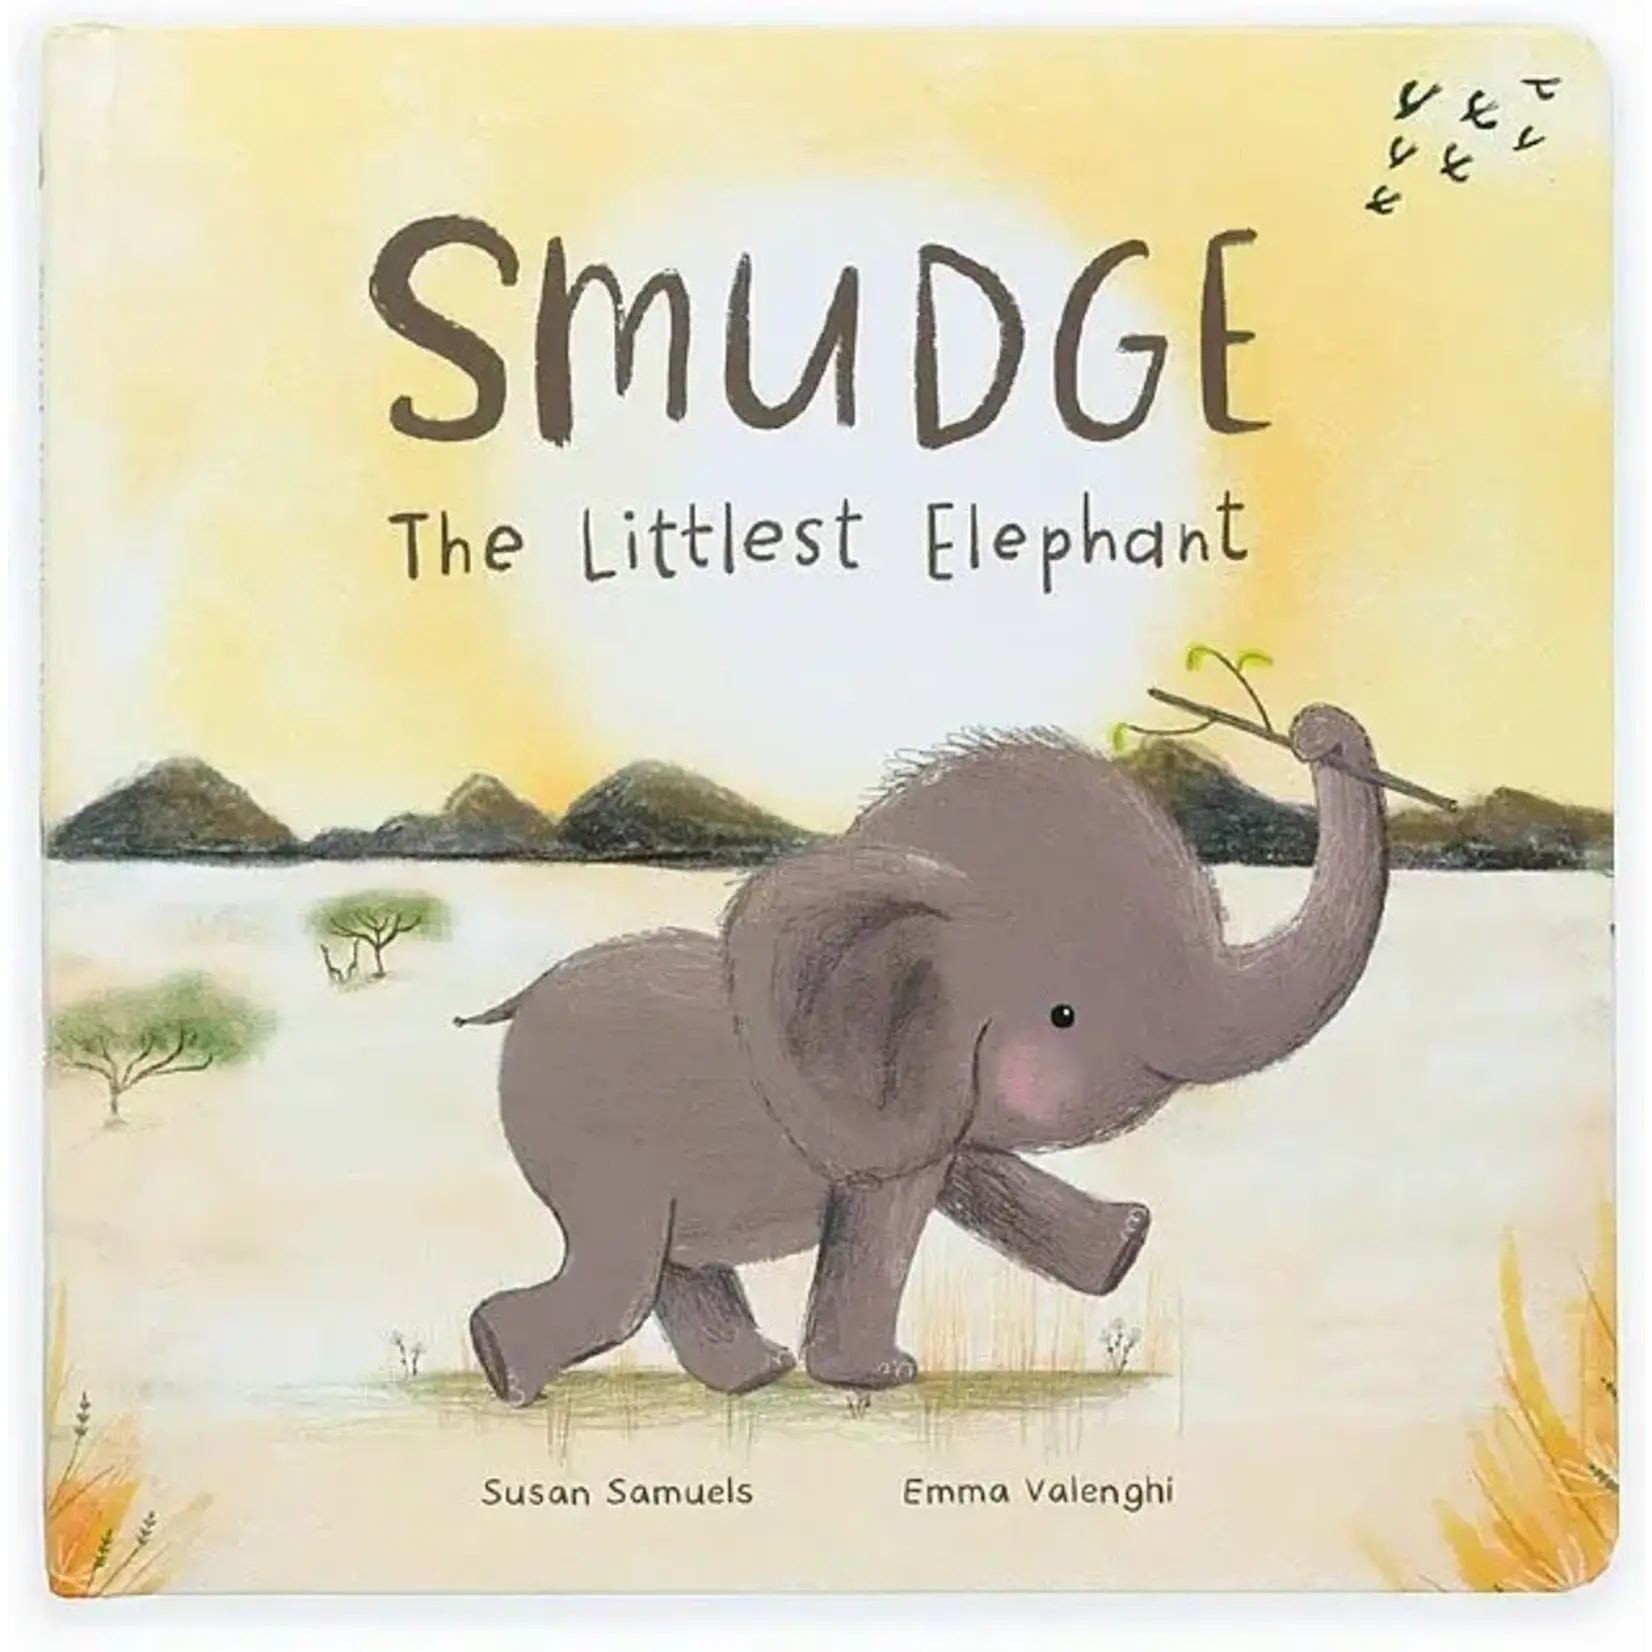 JELLYCAT Smudge the Littlest Elephant Book